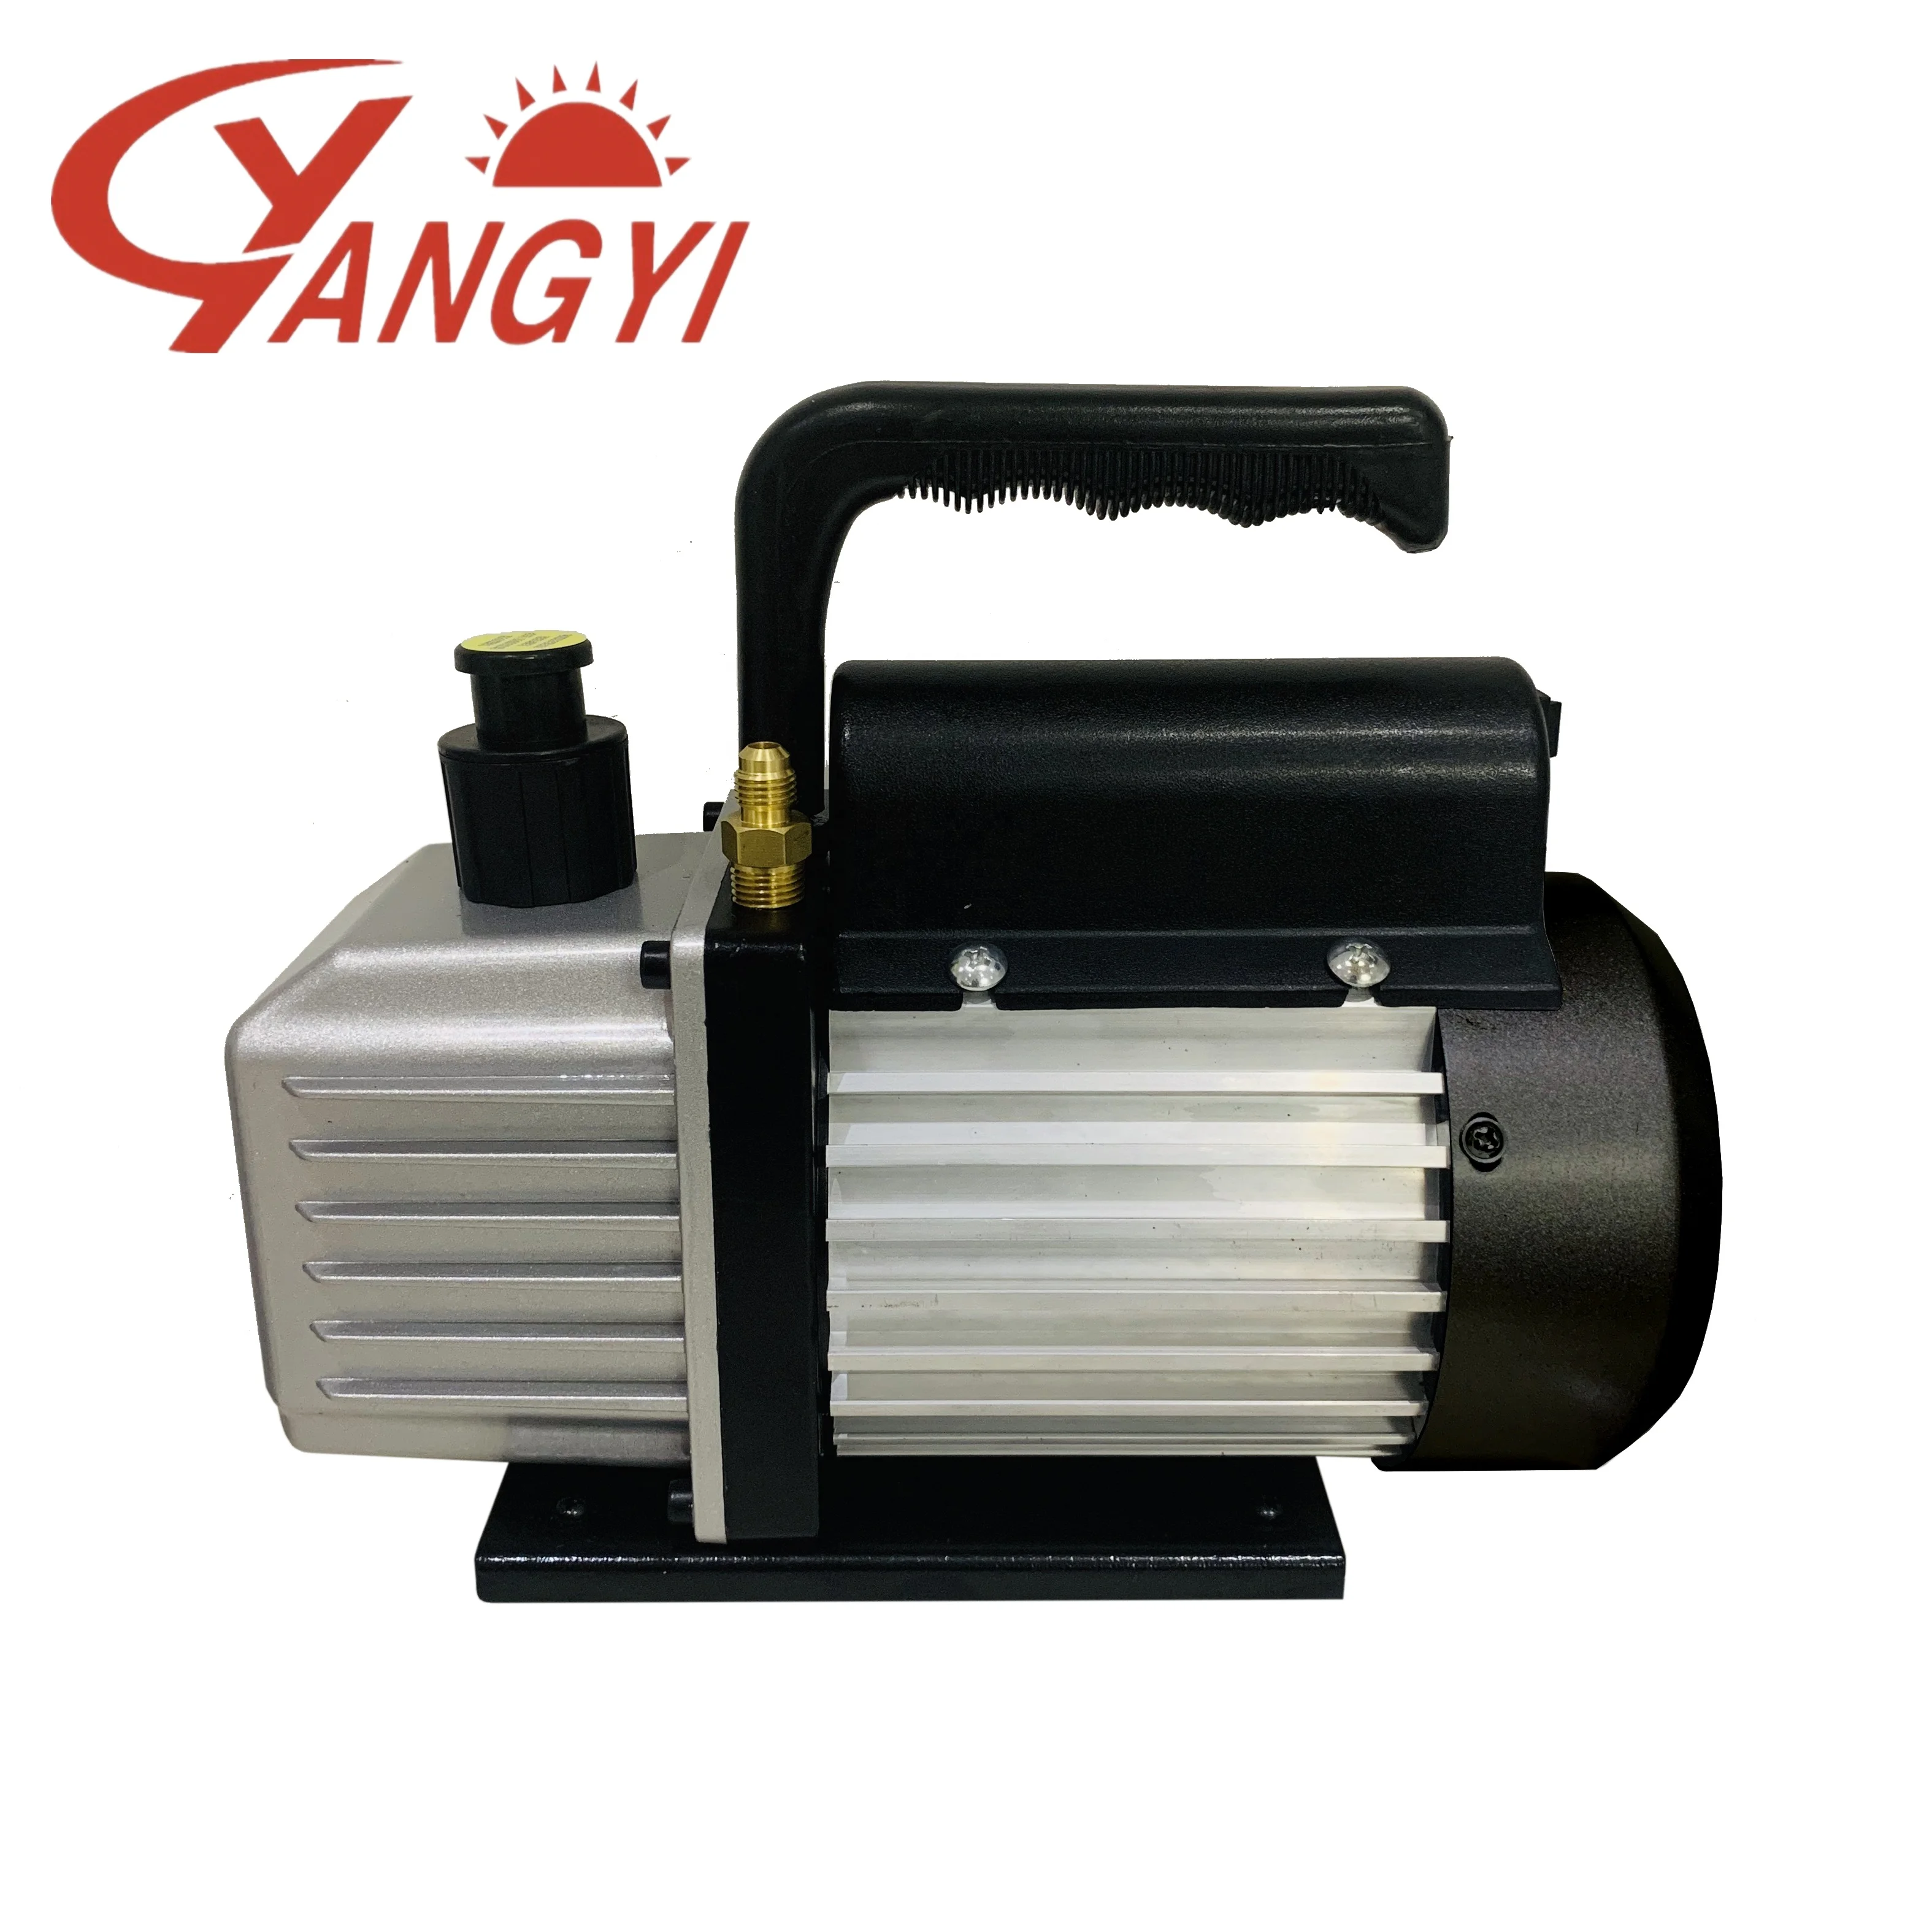 China Manufacturer Rotary Two Stage Vacuum Pump For Refrigeration Air Conditioning Ac Pumps - Buy Rotary Vane Pump,Two Stages Vacuum Pump,Vacuum Pump Product on Alibaba.com